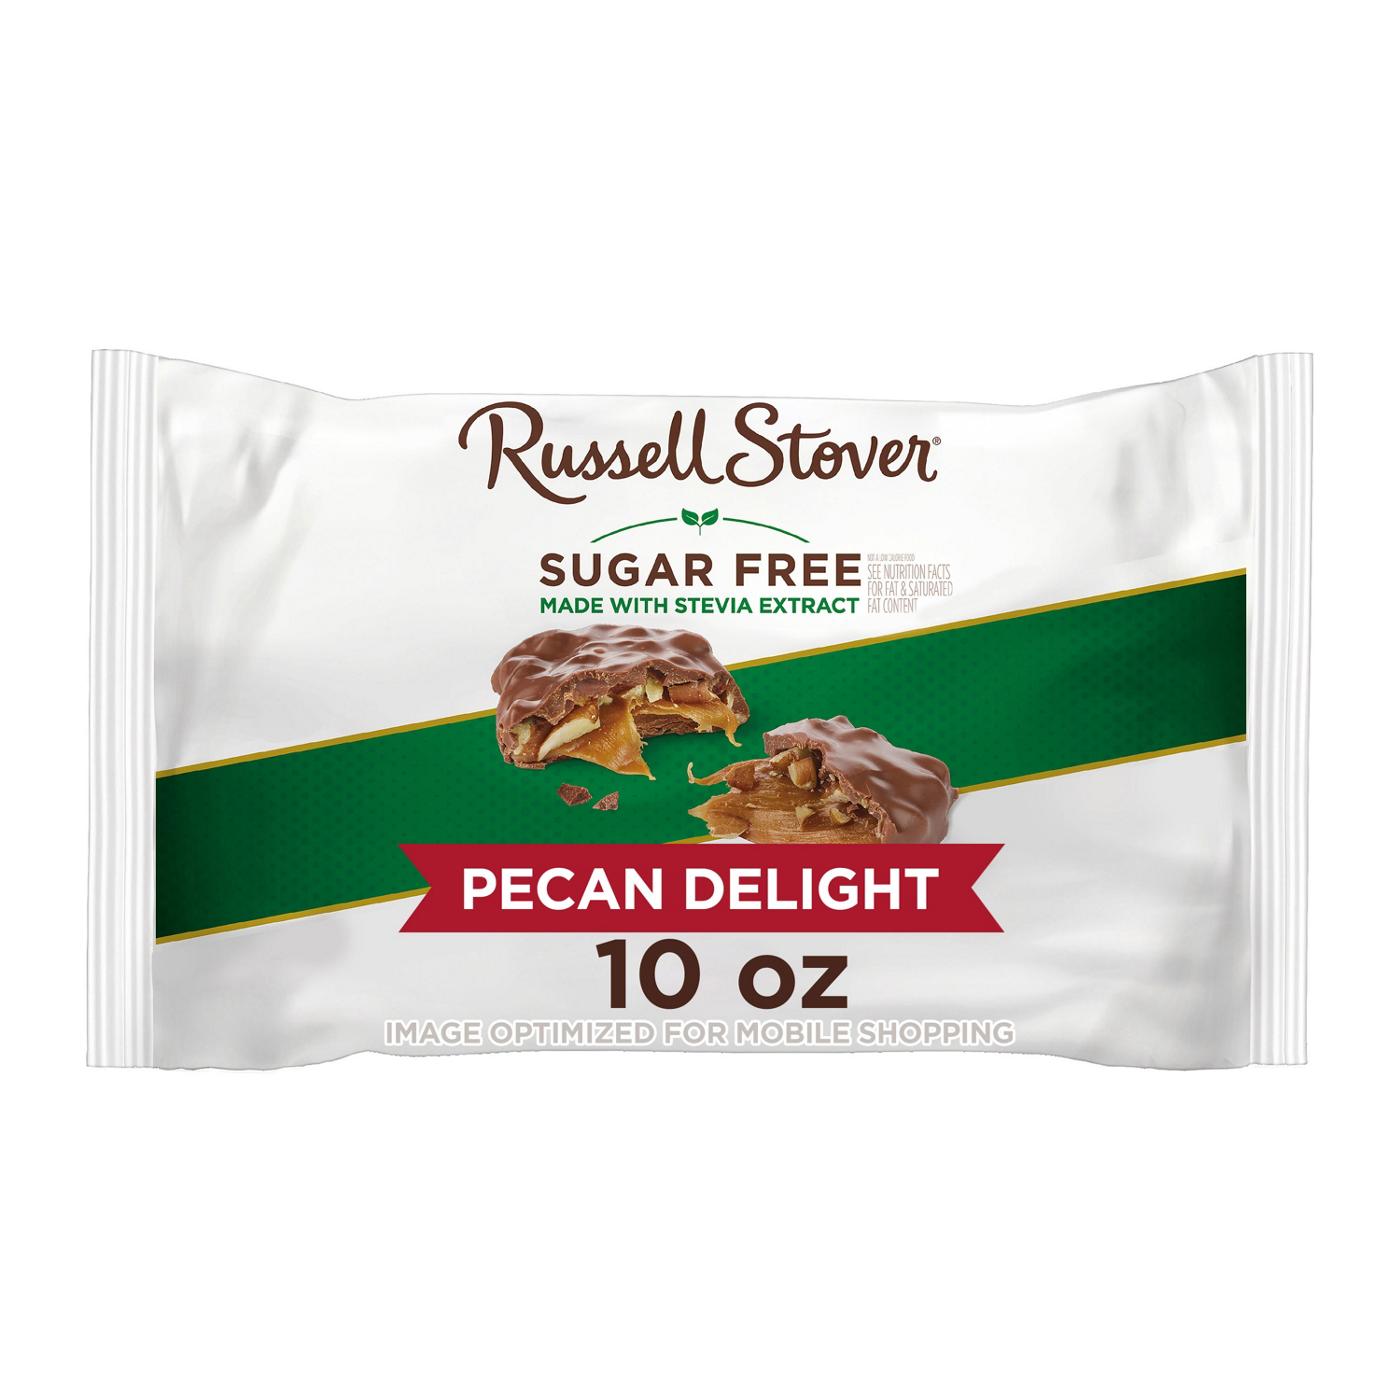 Russell Stover Sugar Free Pecan Delights; image 1 of 8